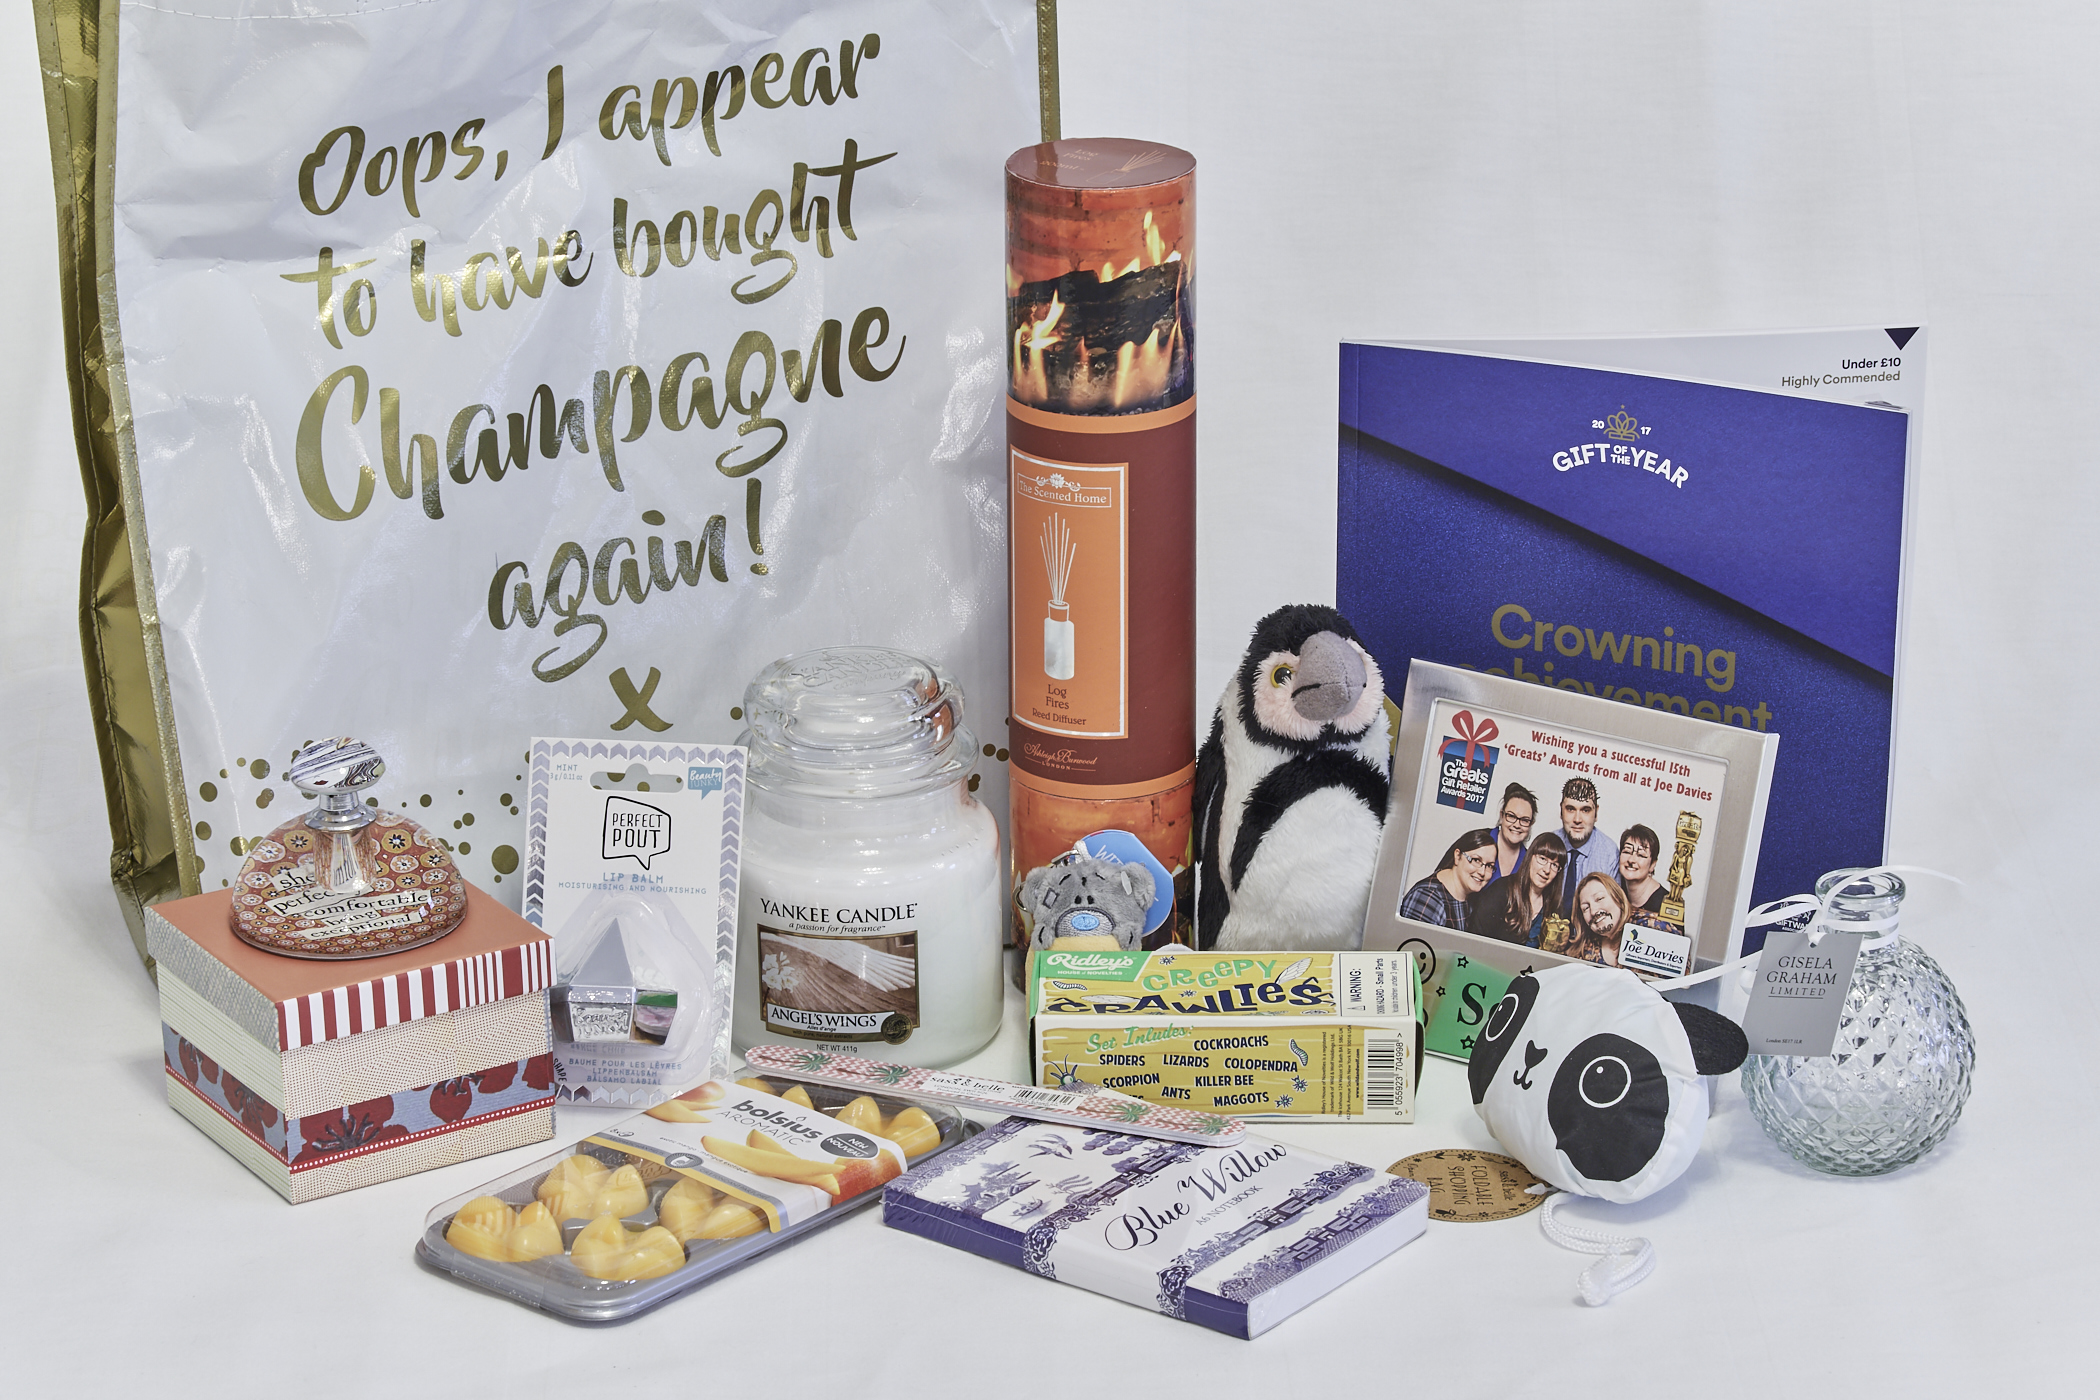 goody bag and contents